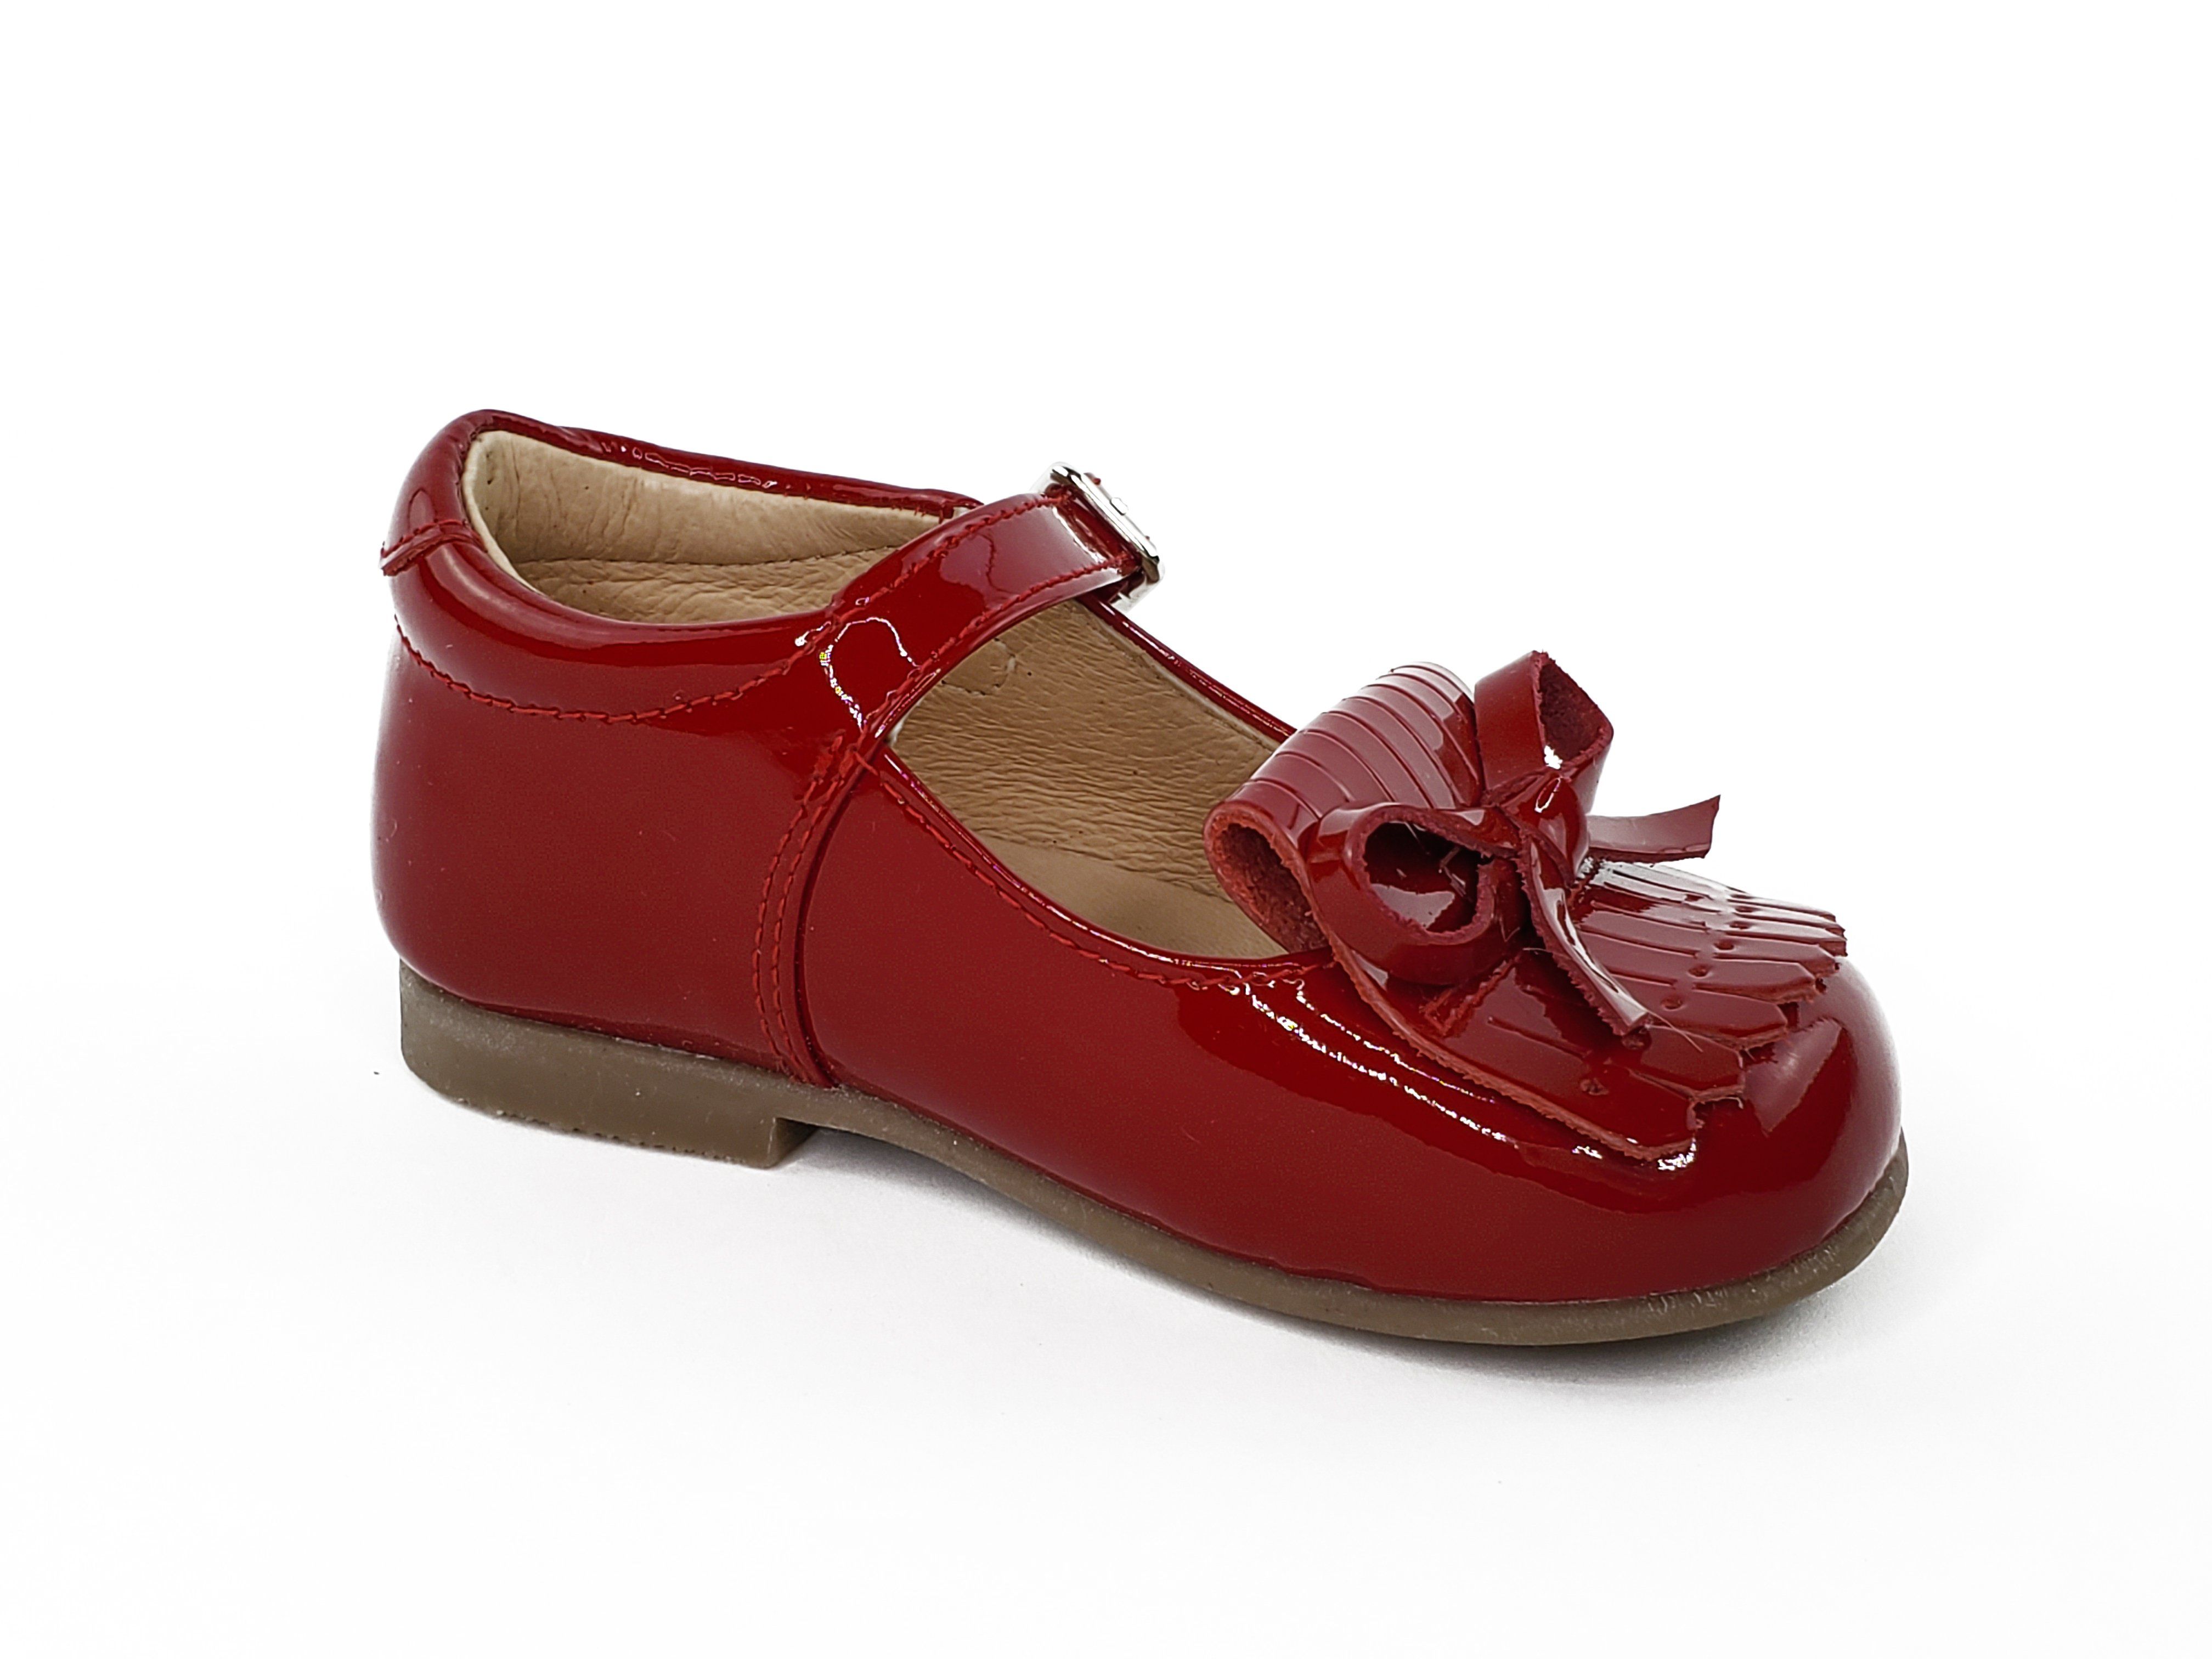 Venus Red Patent Kilted Mary Janes Shoes-Toddler Girl Shoes Girls Shoes Alfa Baby Boutique - Left Inside View